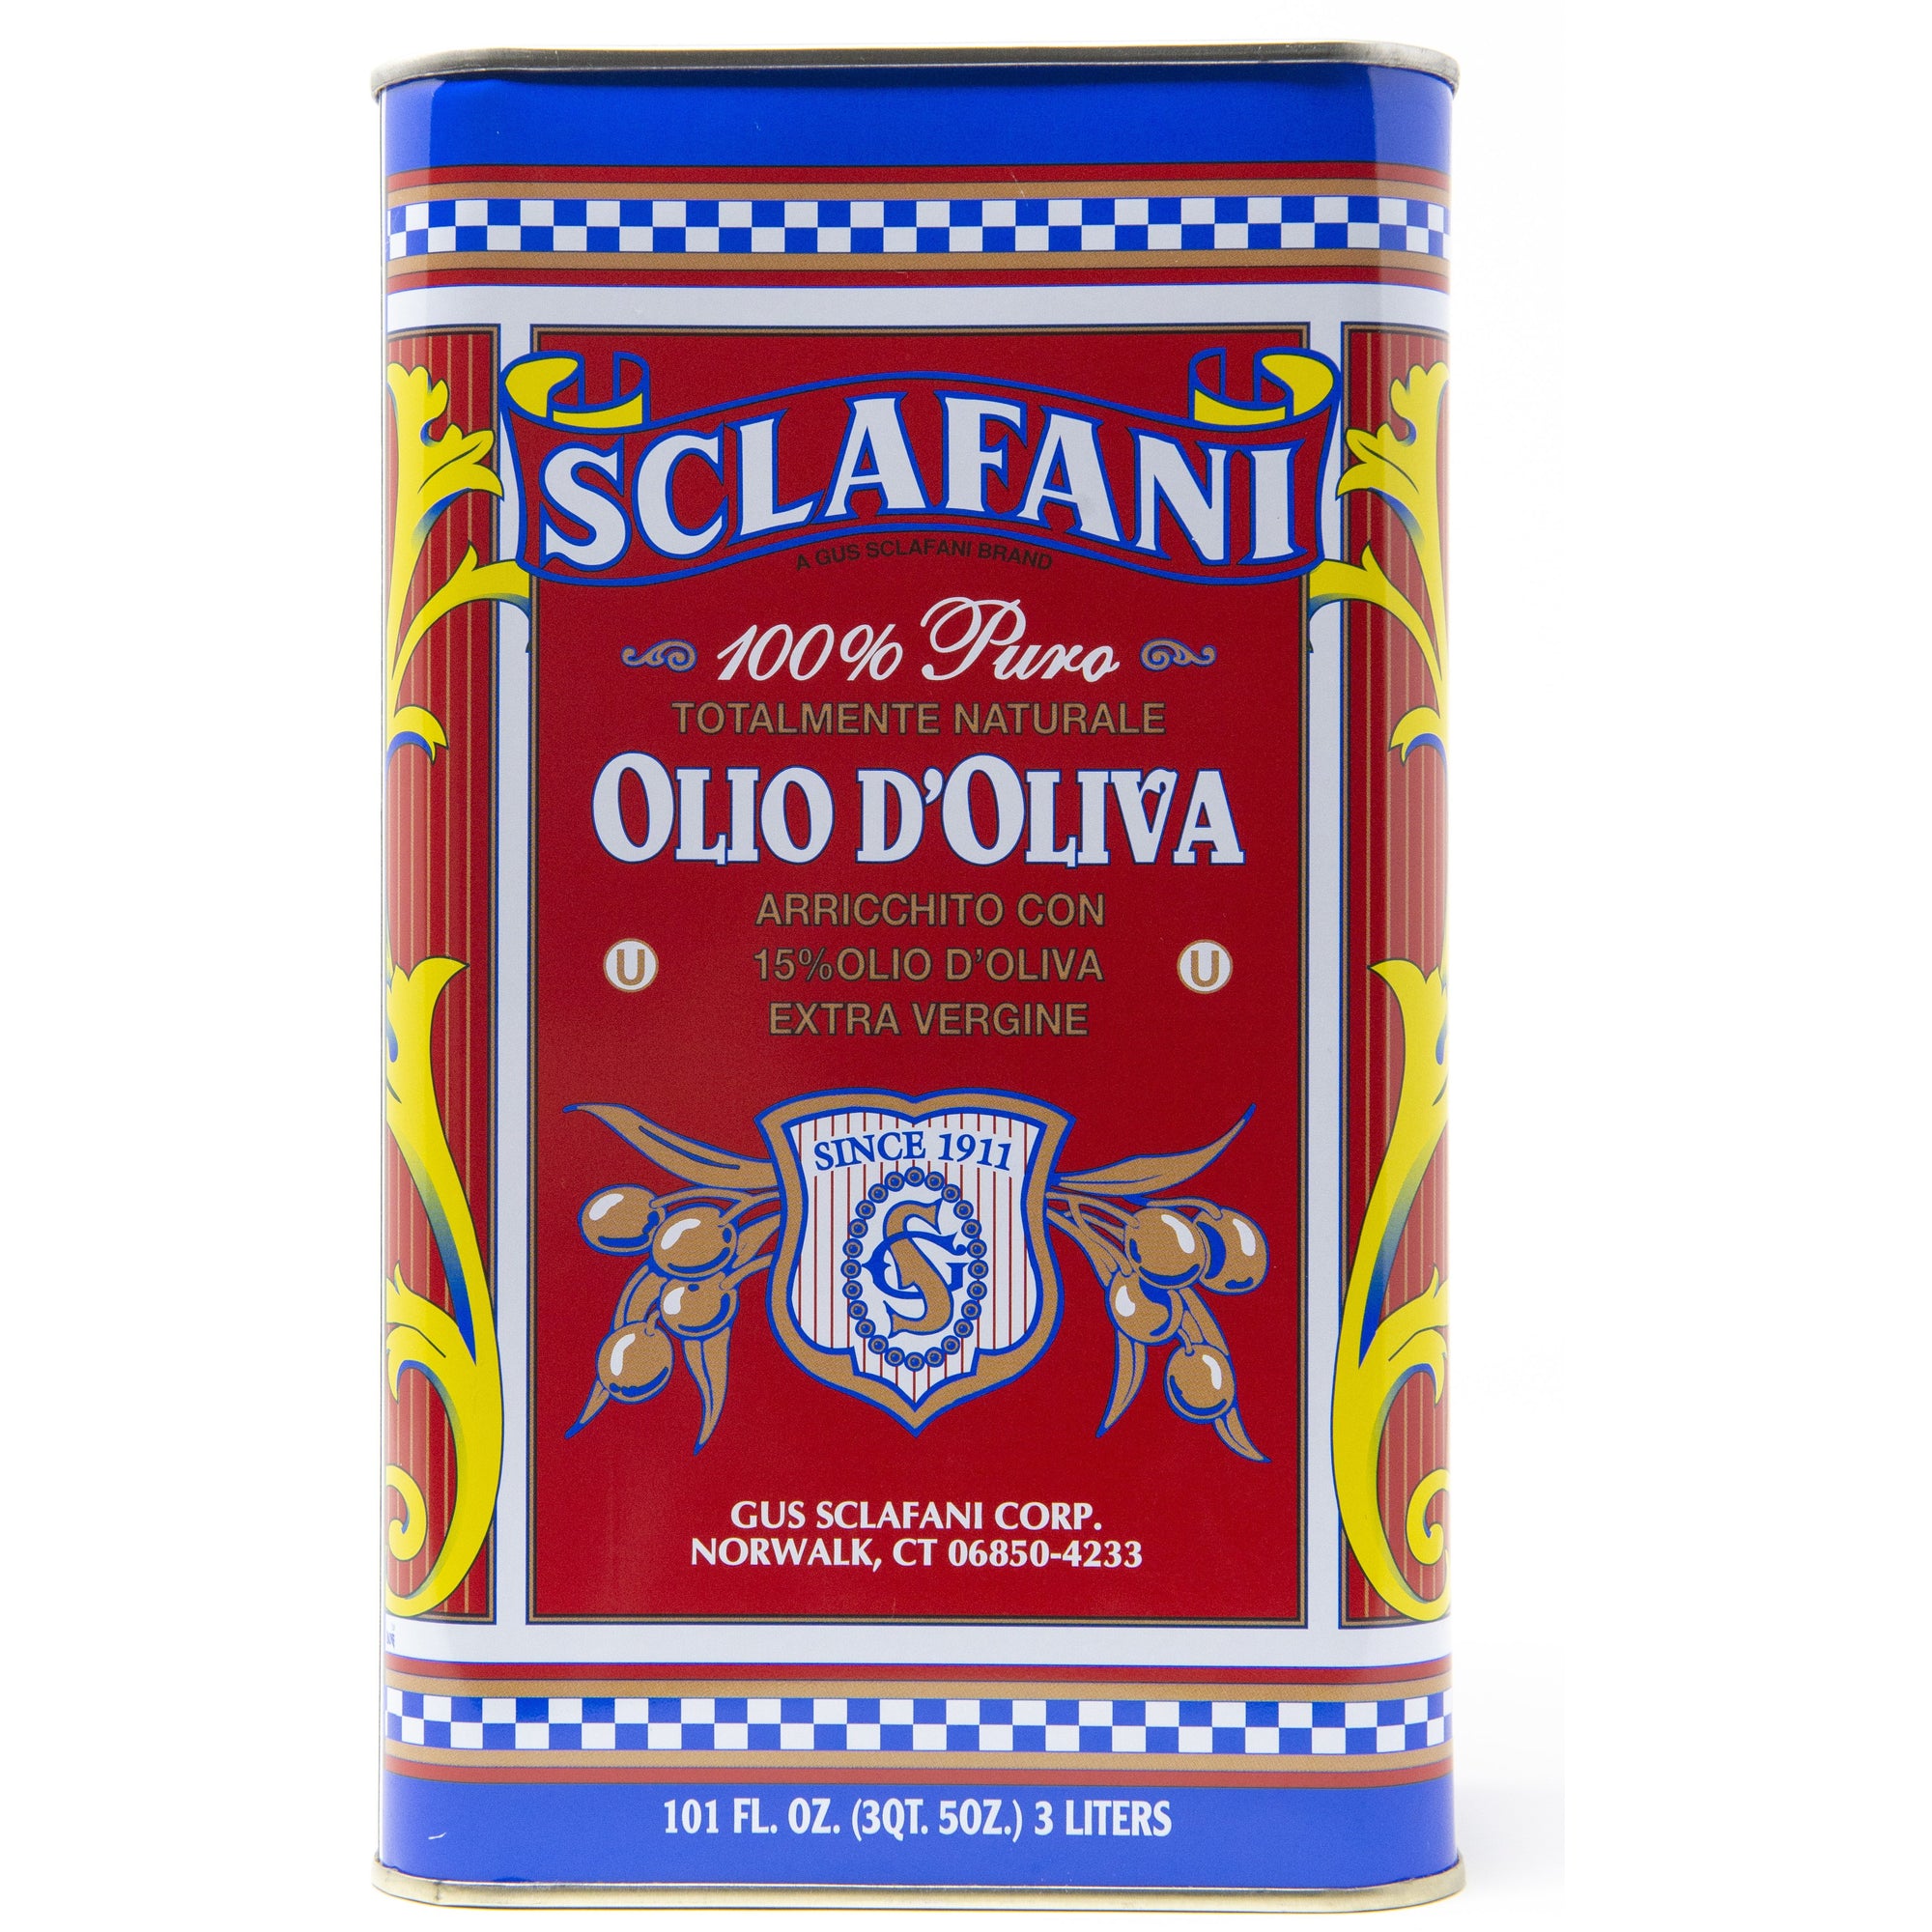 Sclafani Pure Olive Oil 15% Extra Virgin Enriched 3 Liter Tin